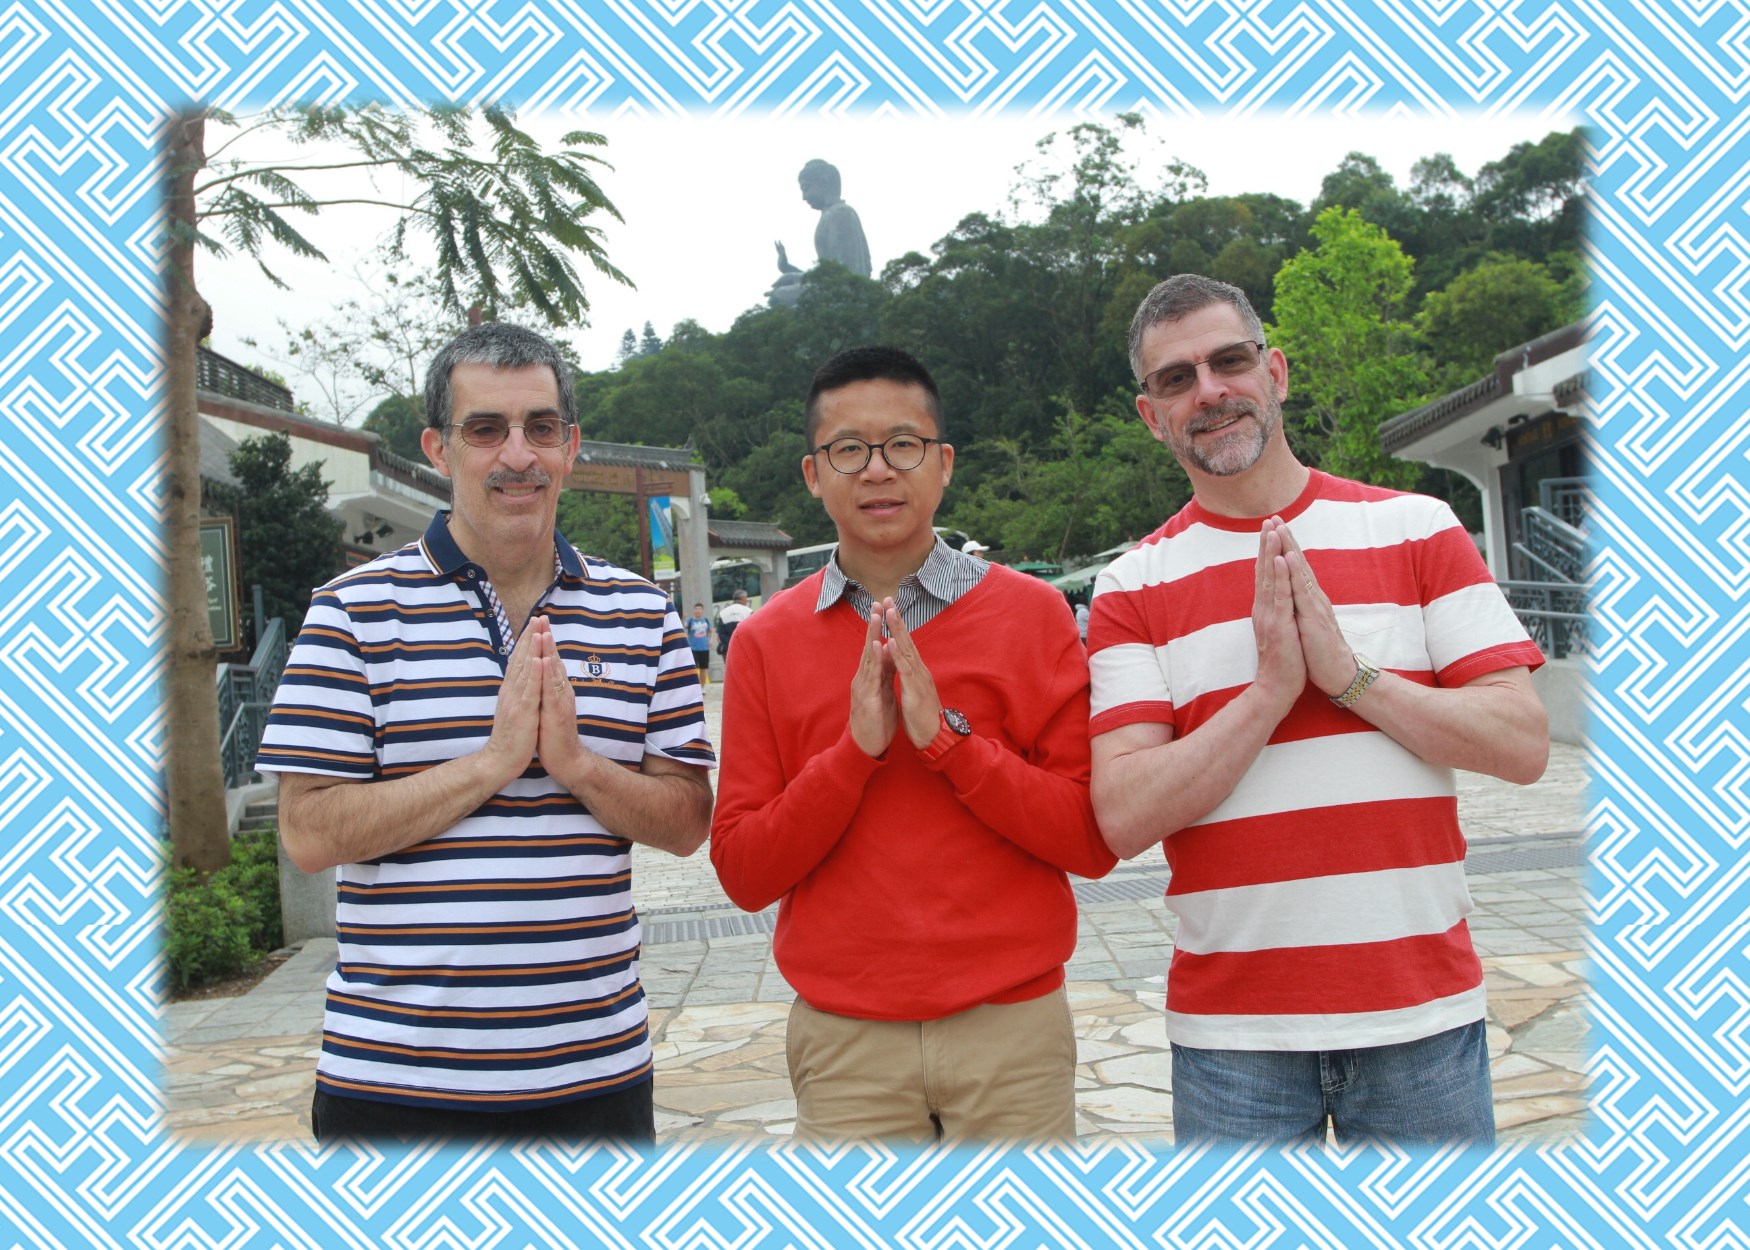 Frank the tour guide takes photo with Marvin Downs and friend near the Big Buddha